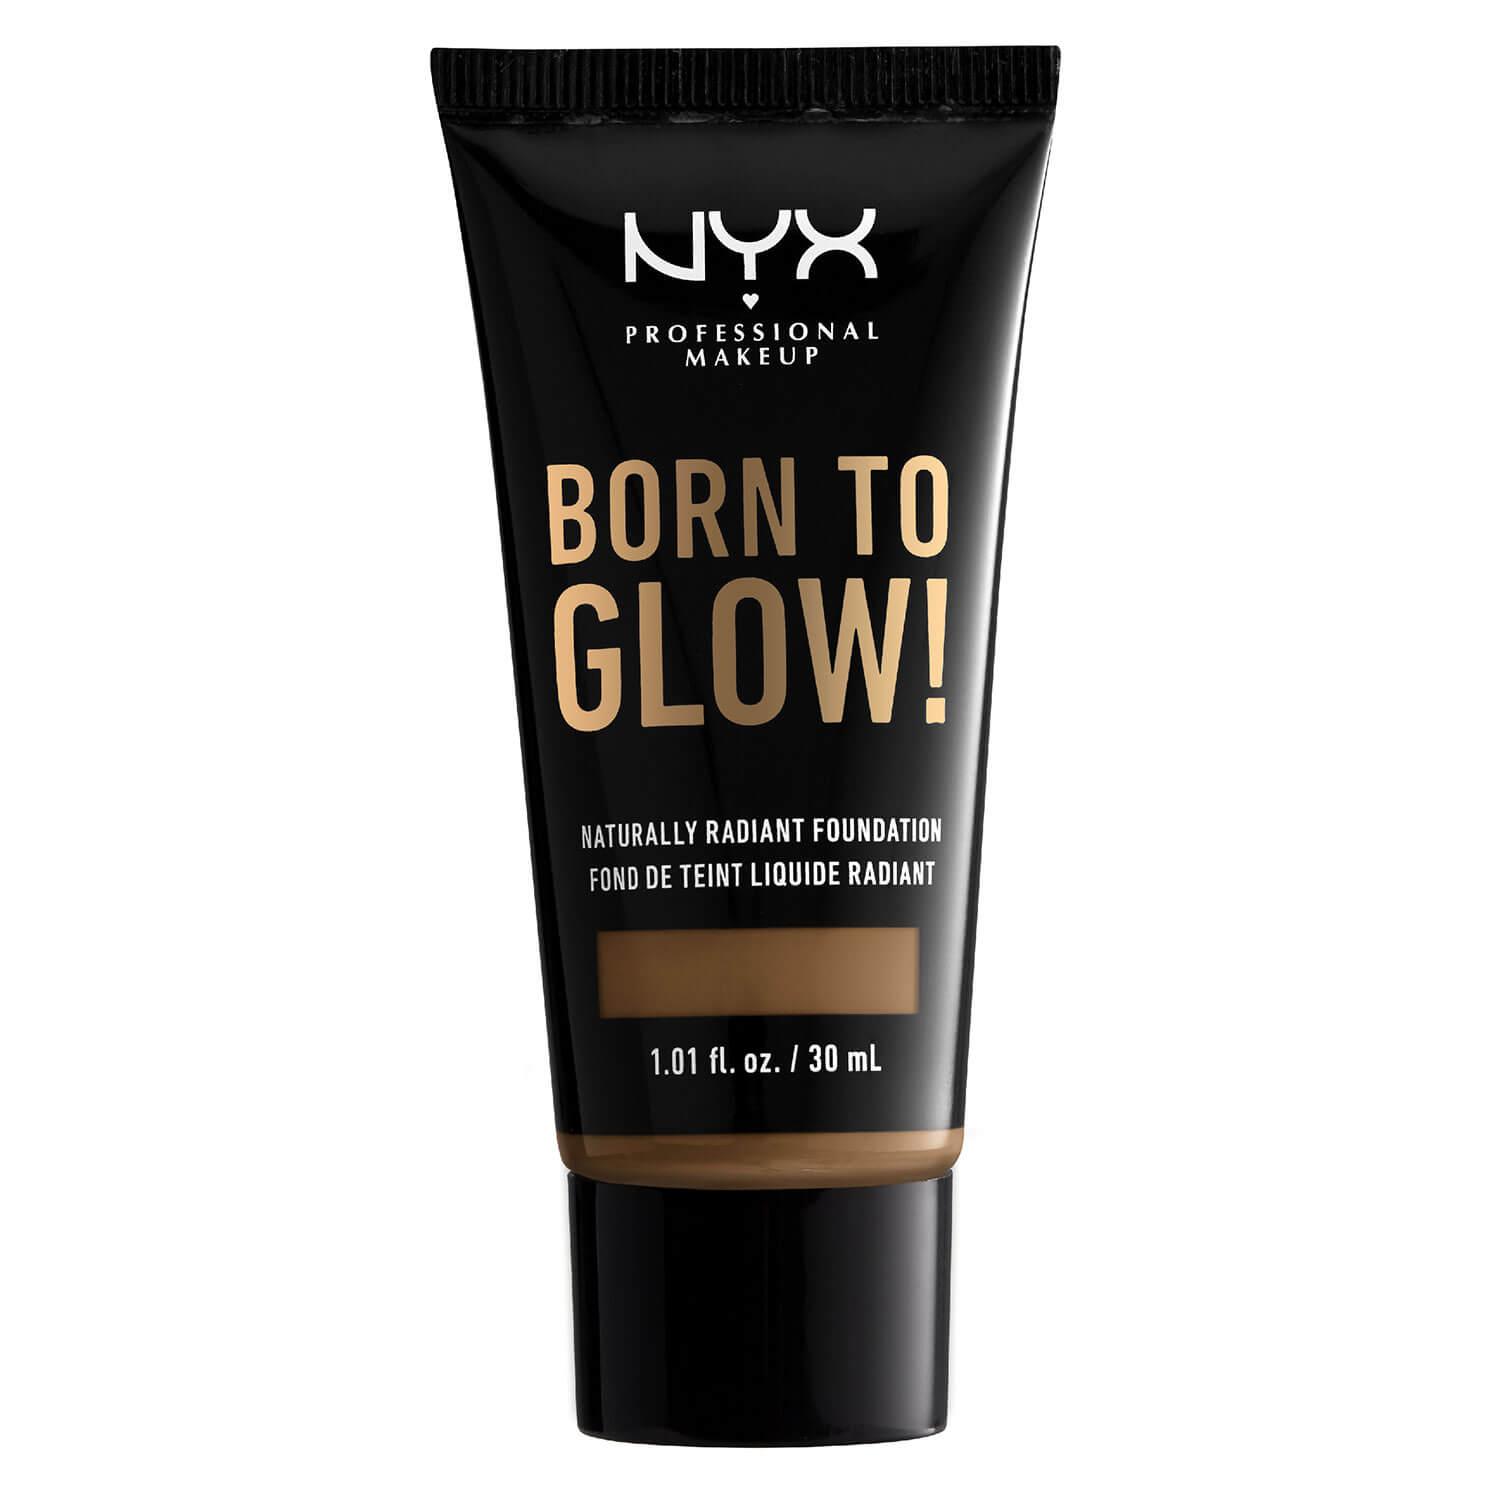 Born to Glow - Naturally Radiant Foundation Sienna